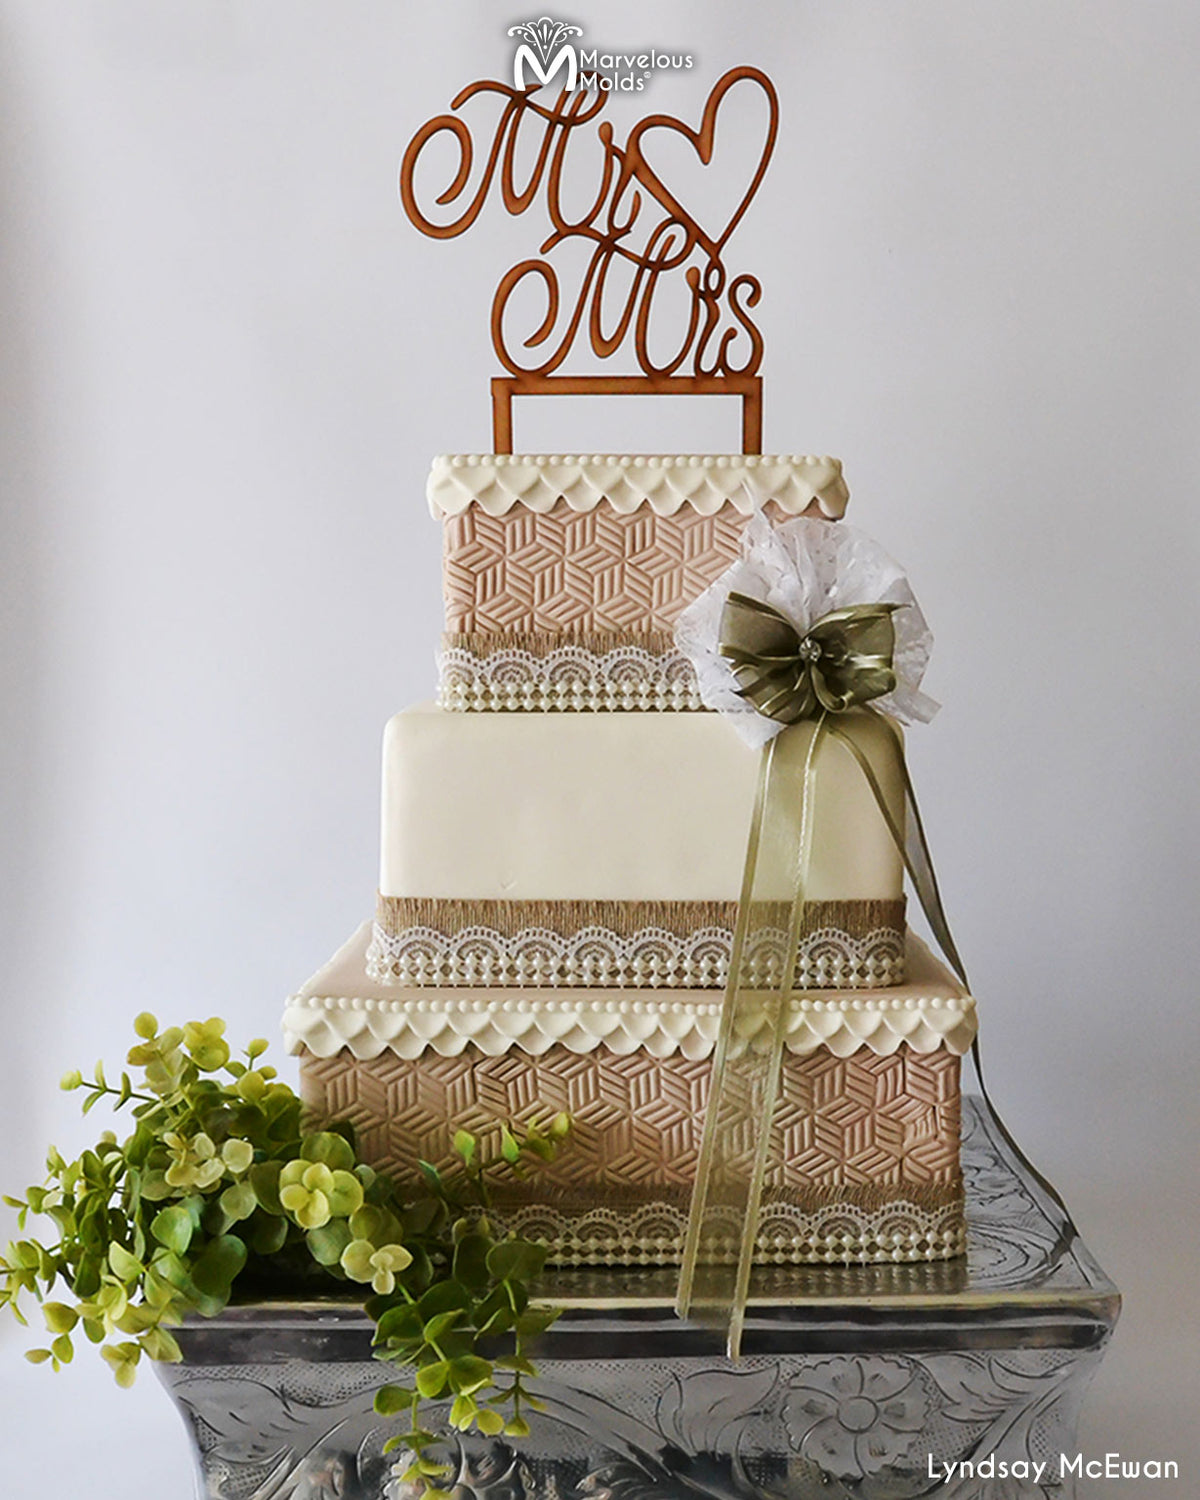 Classy Vintage Wedding Cake Decorated with Marvelous Molds Ruffle Border Silicone Mold